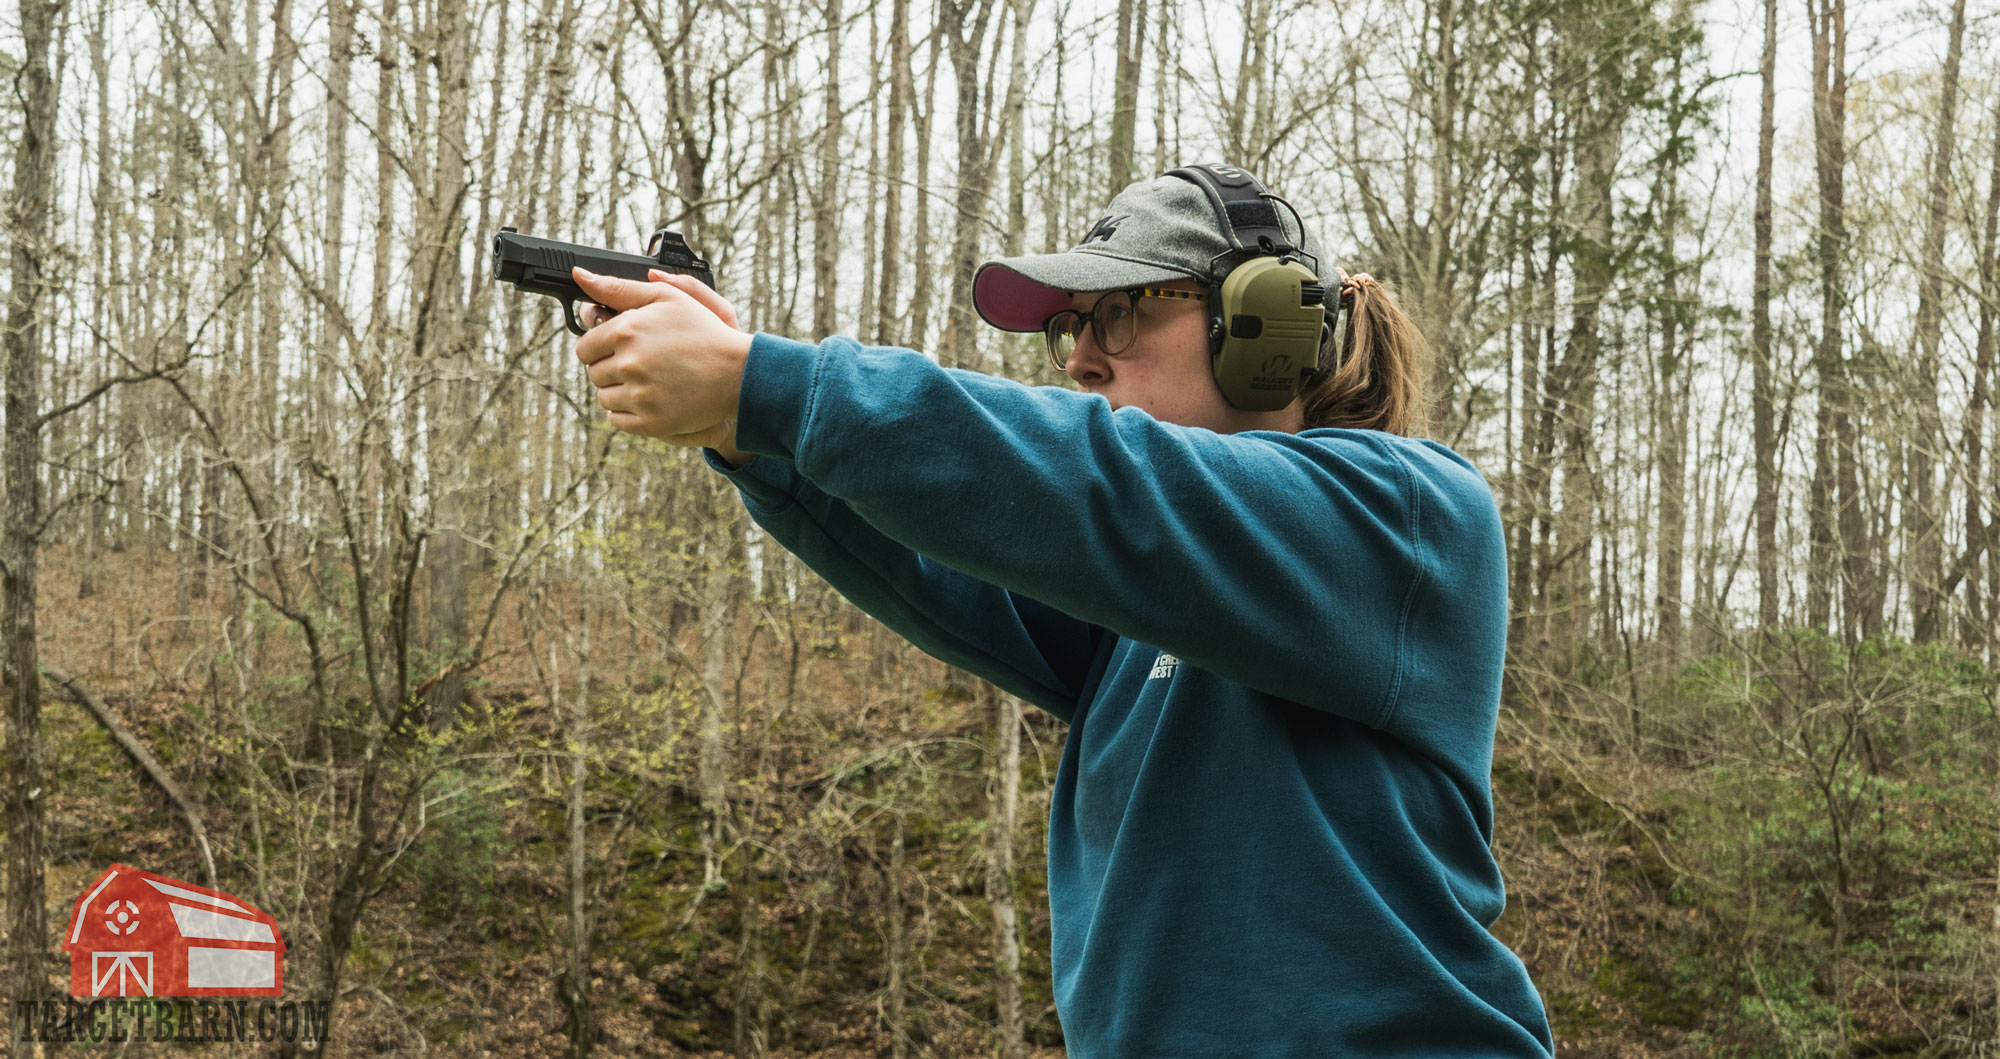 the author shooting a sig p365xl 9mm pistol